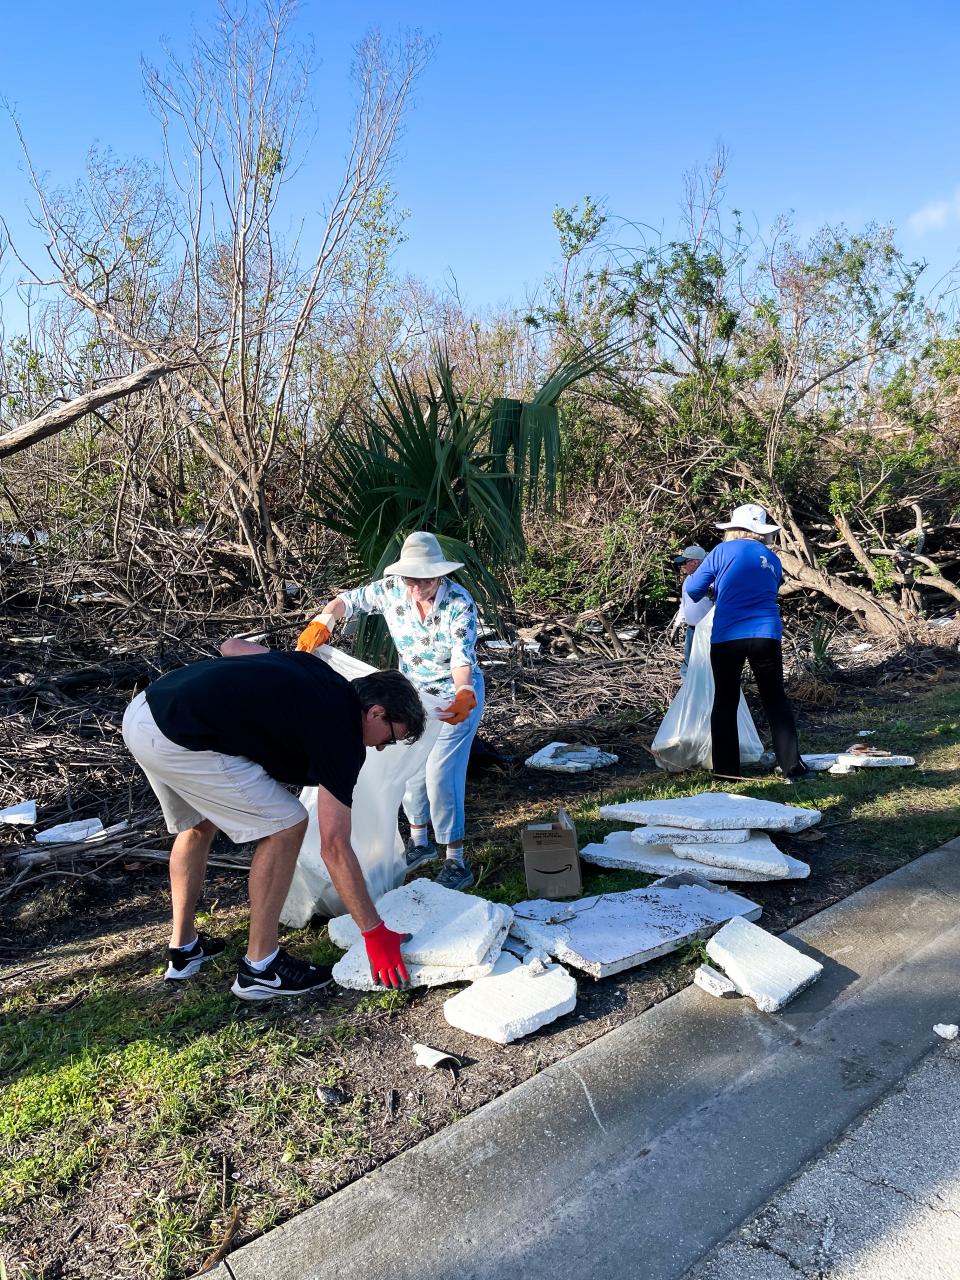 Residents of the Kelly Green community in Fort Myers working on cleaning up after Hurricane Ian last September.